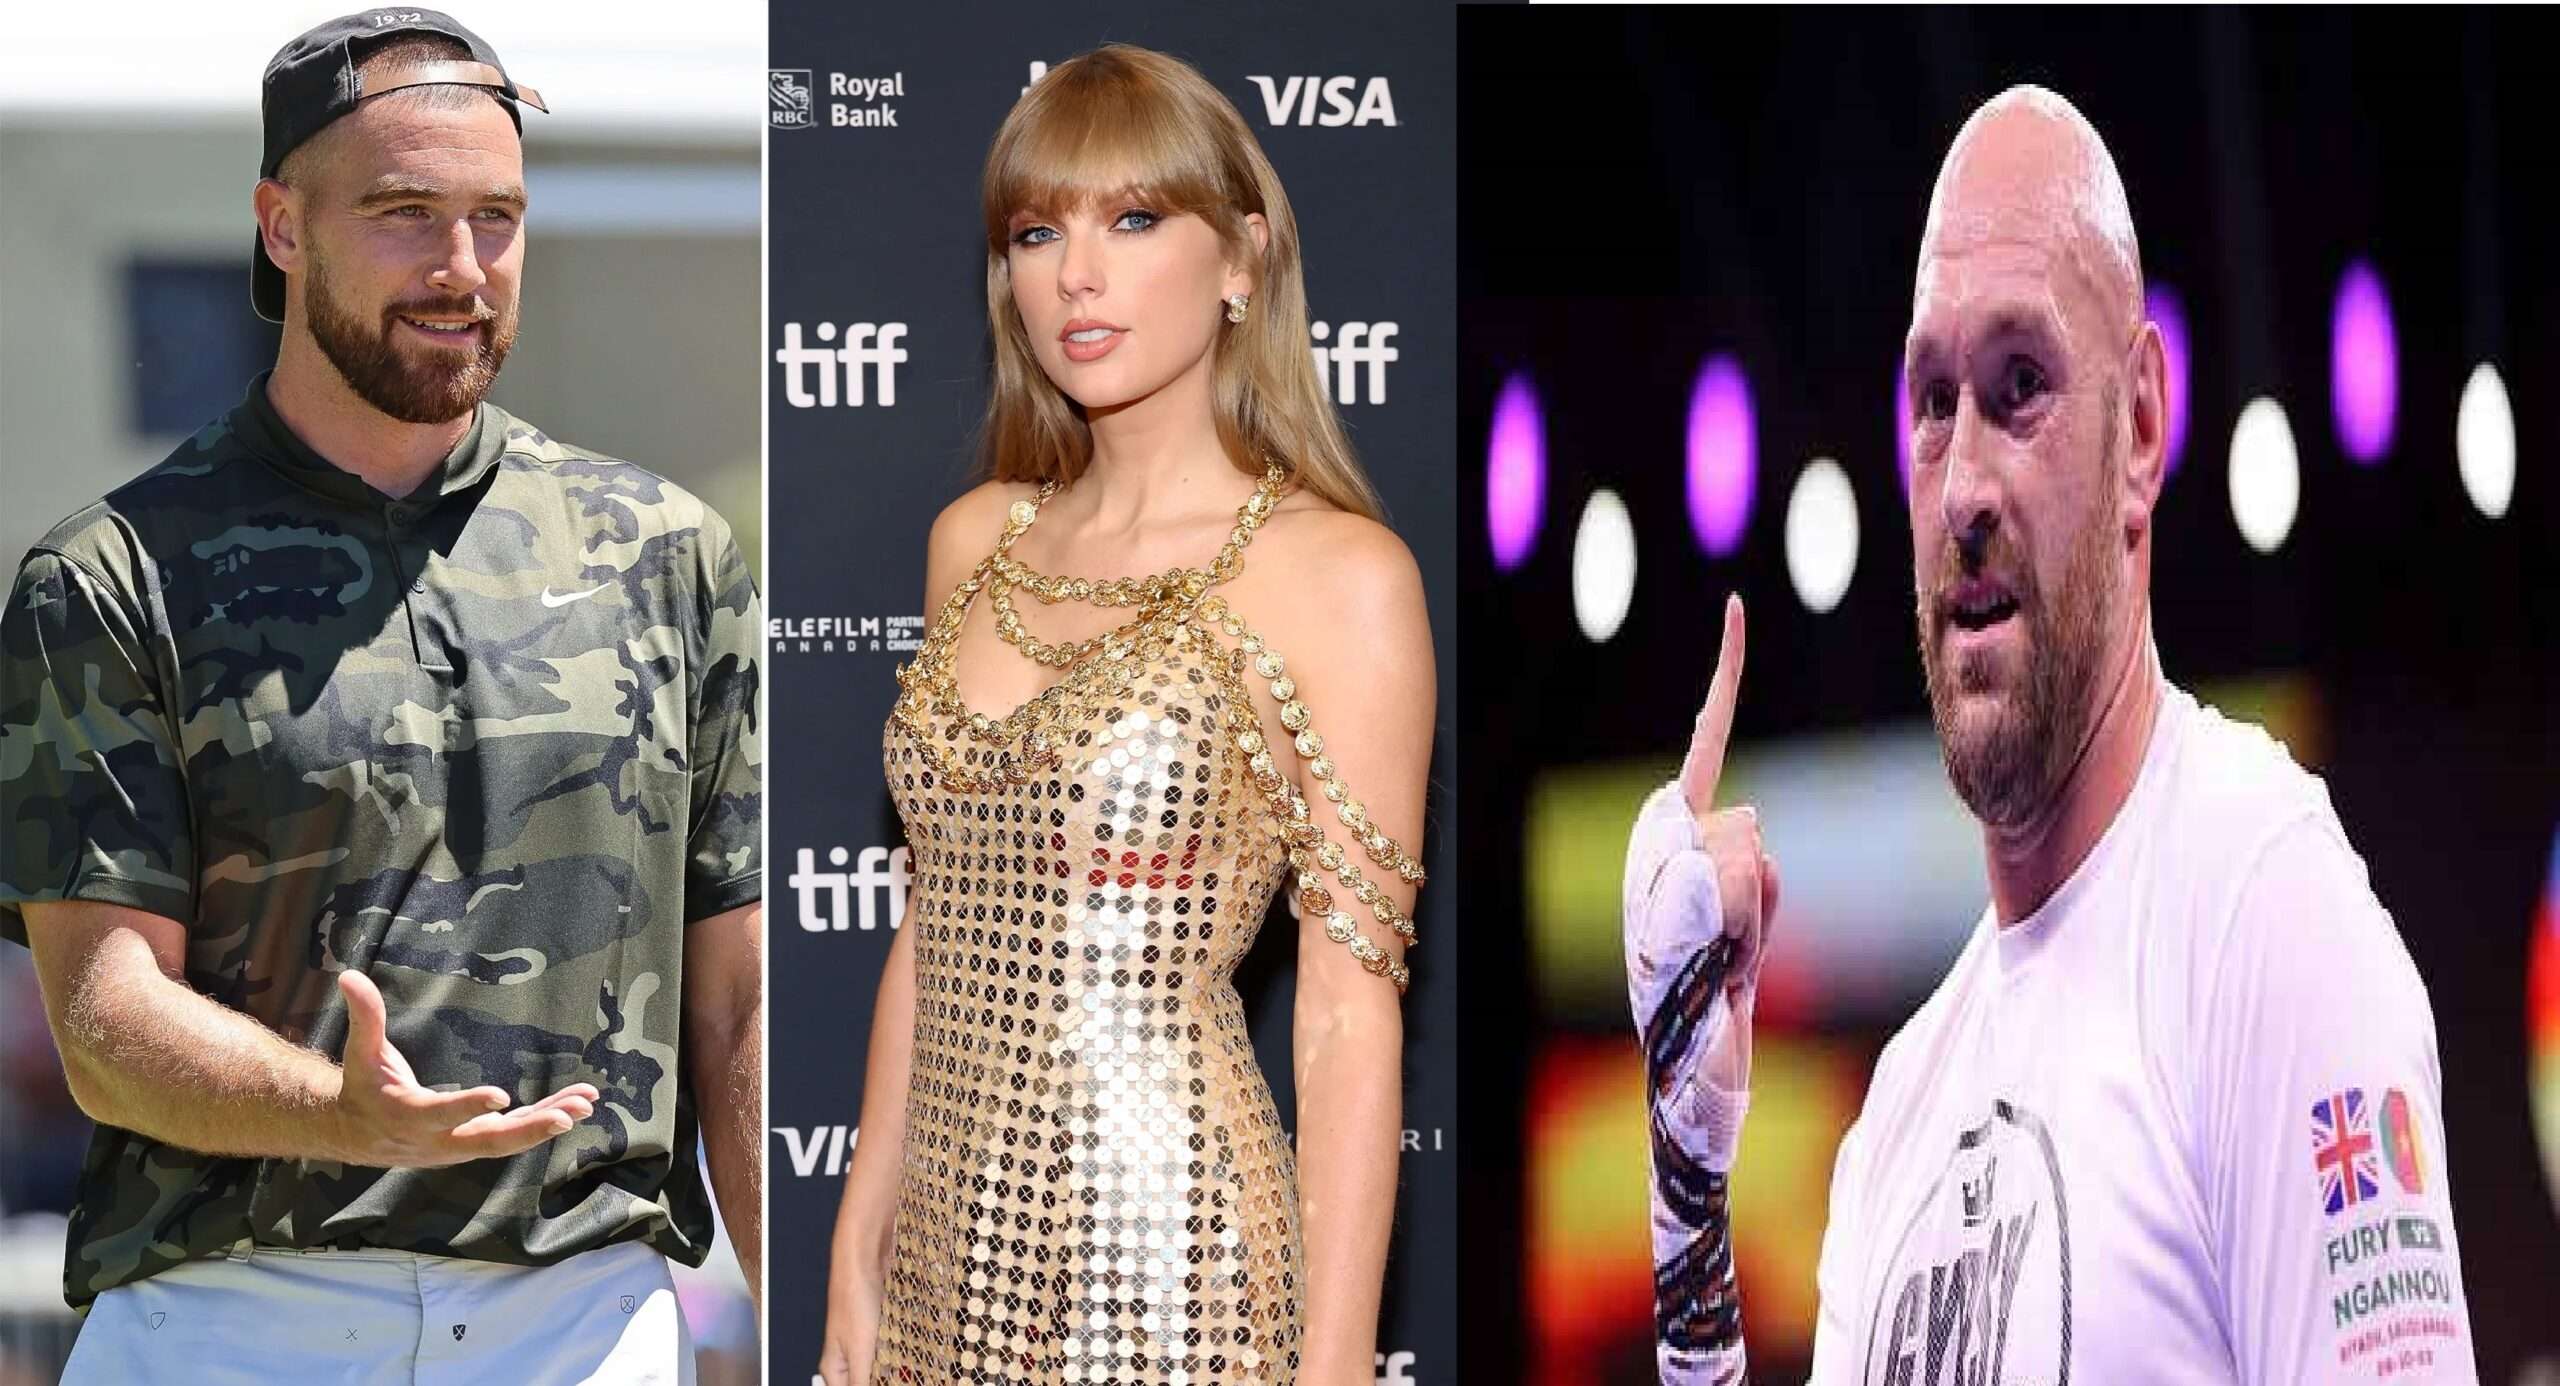 Tyson Fury tells Taylor Swift she’s a ‘lucky lady’ as Travis Kelce is Crowned ‘World’s Sexiest Man’ Over Cristiano Ronaldo, Anthony Joshua and Tyson Fury